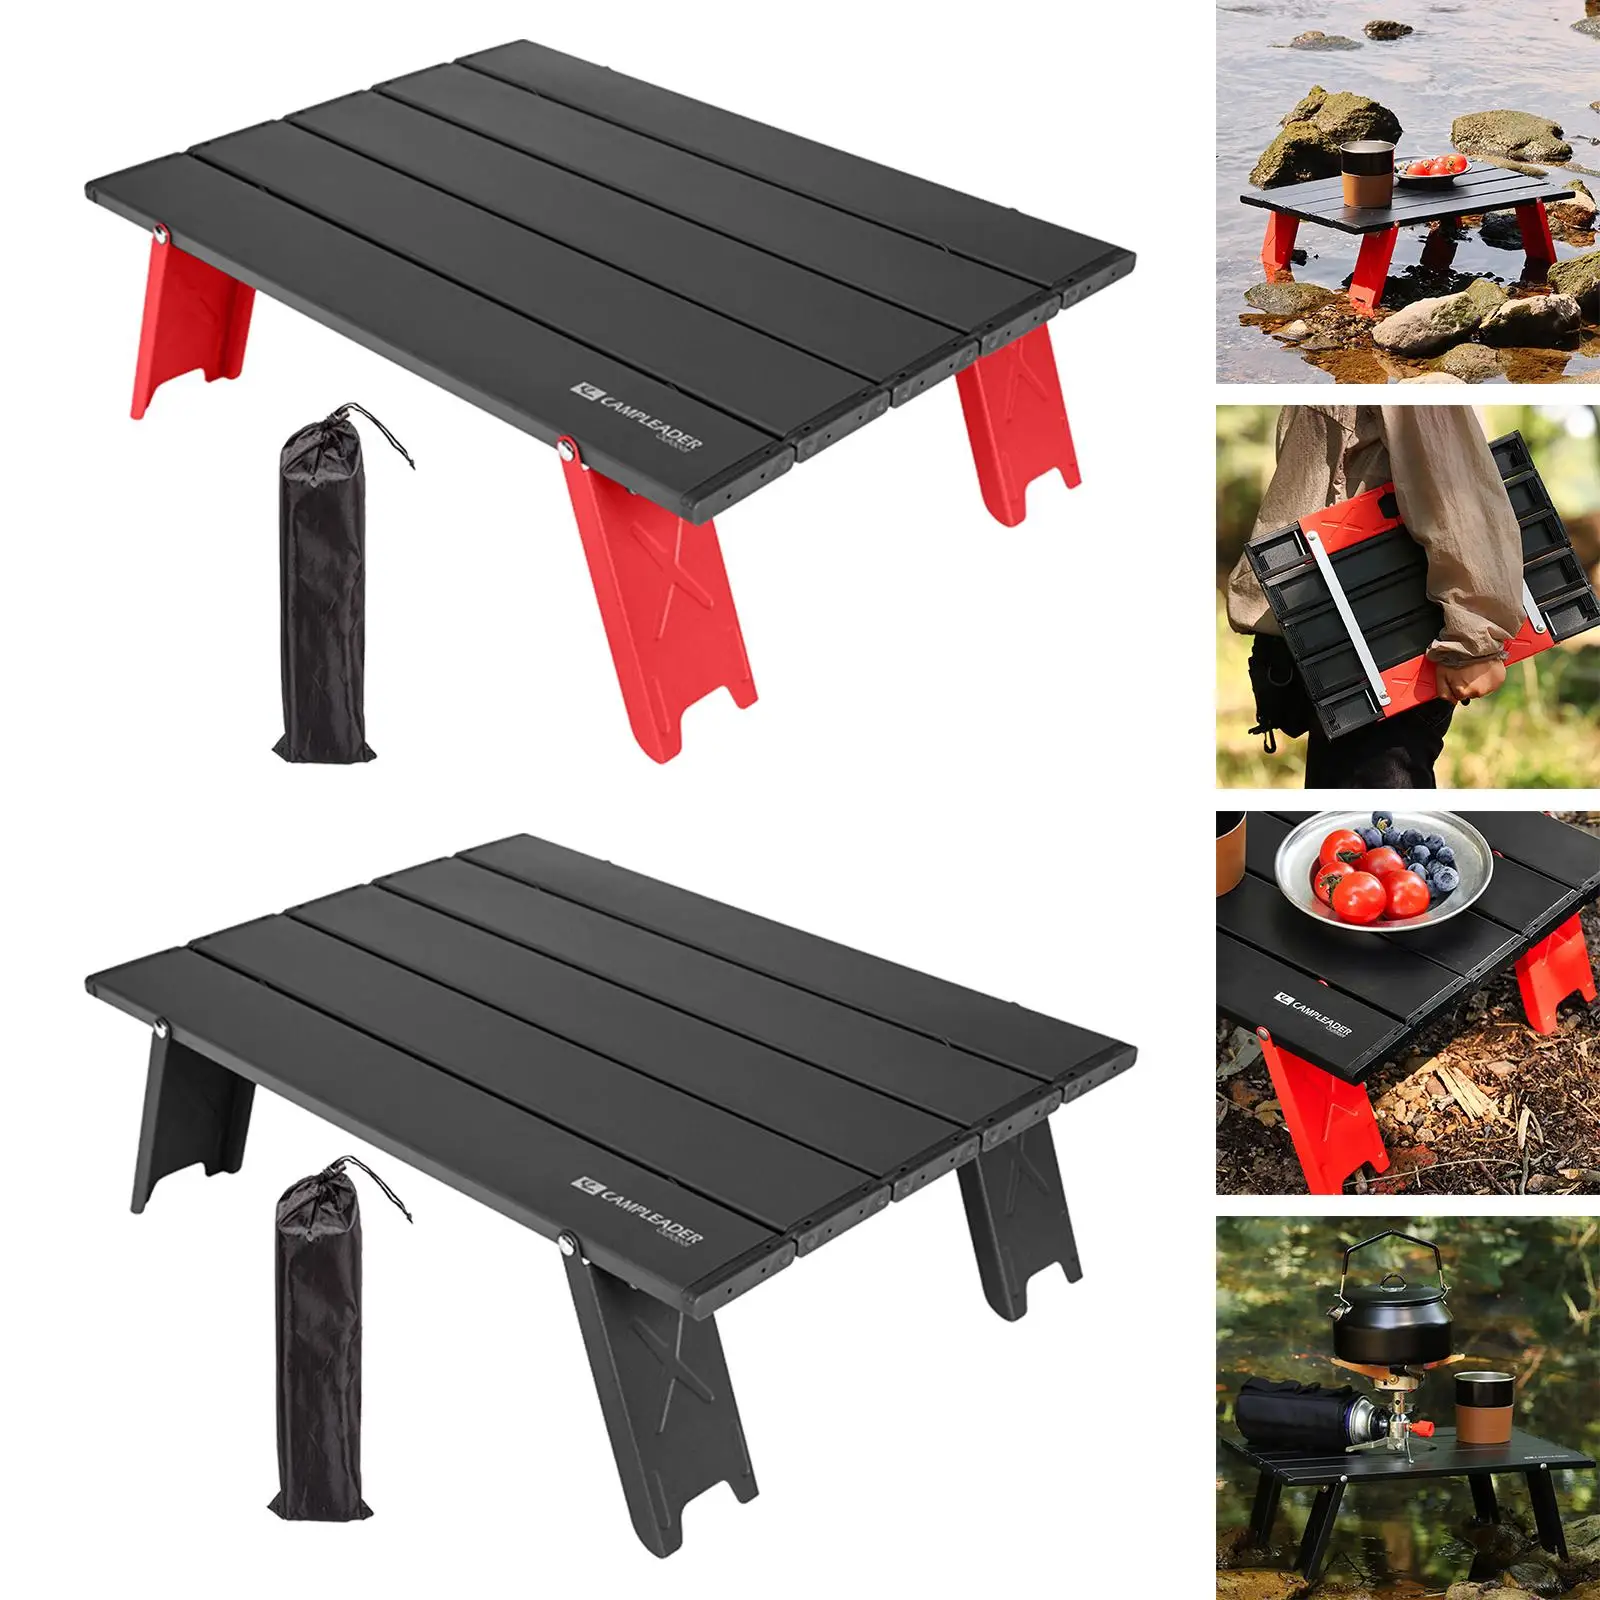 Folding Camping Table, Foldable Picnic Table with Carrying Bag, Folding Table,